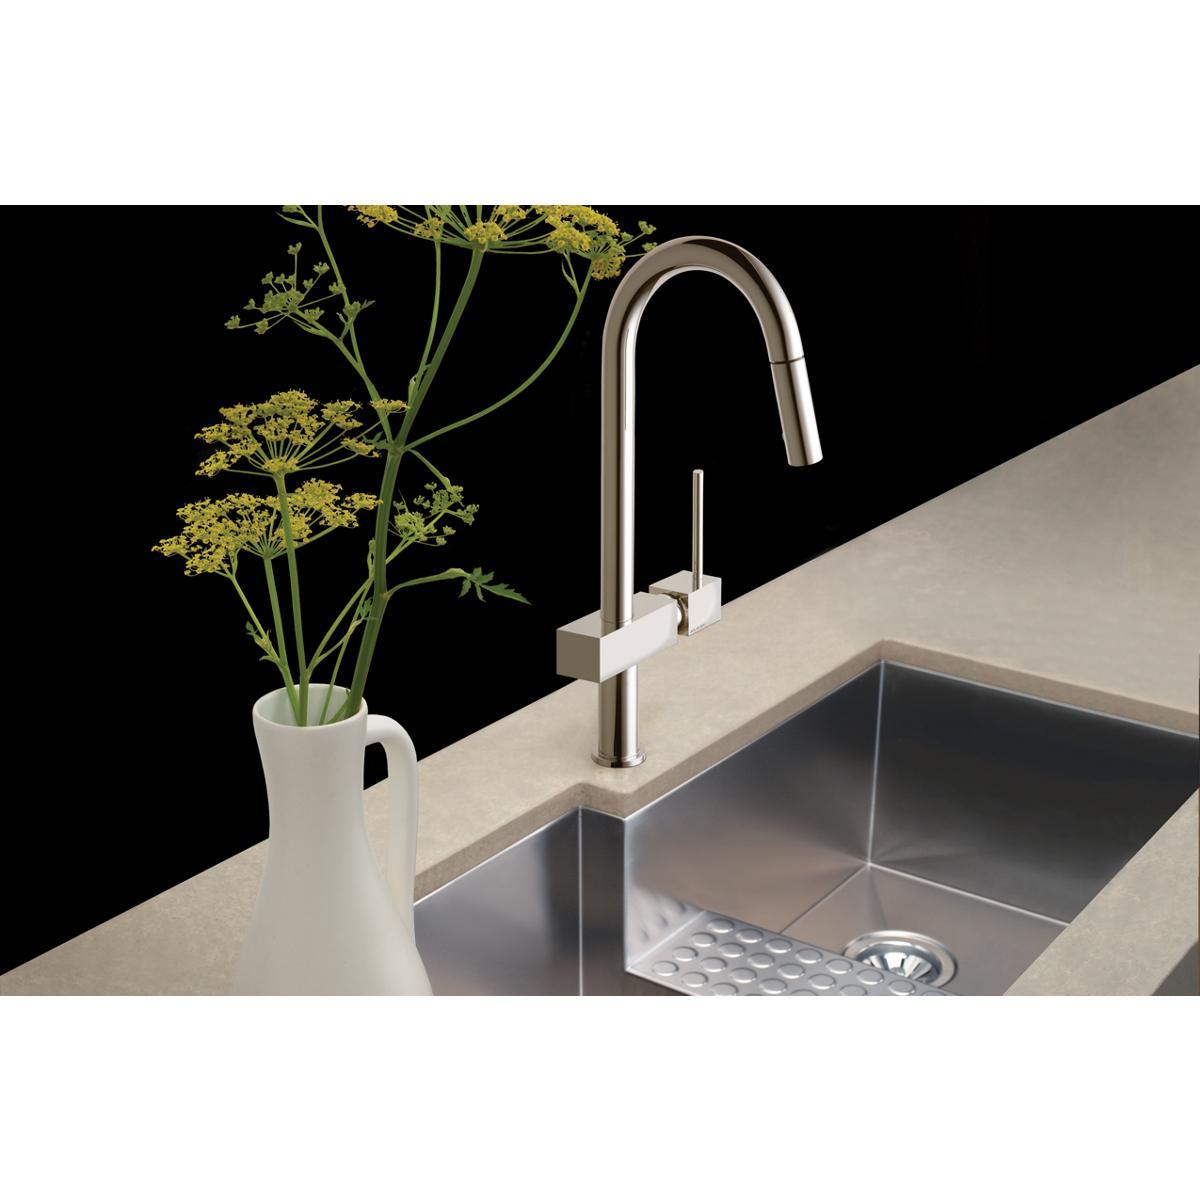 Elkay Avado Single Hole Kitchen Faucet with Pull-down Spray and Lever Handle-DirectSinks